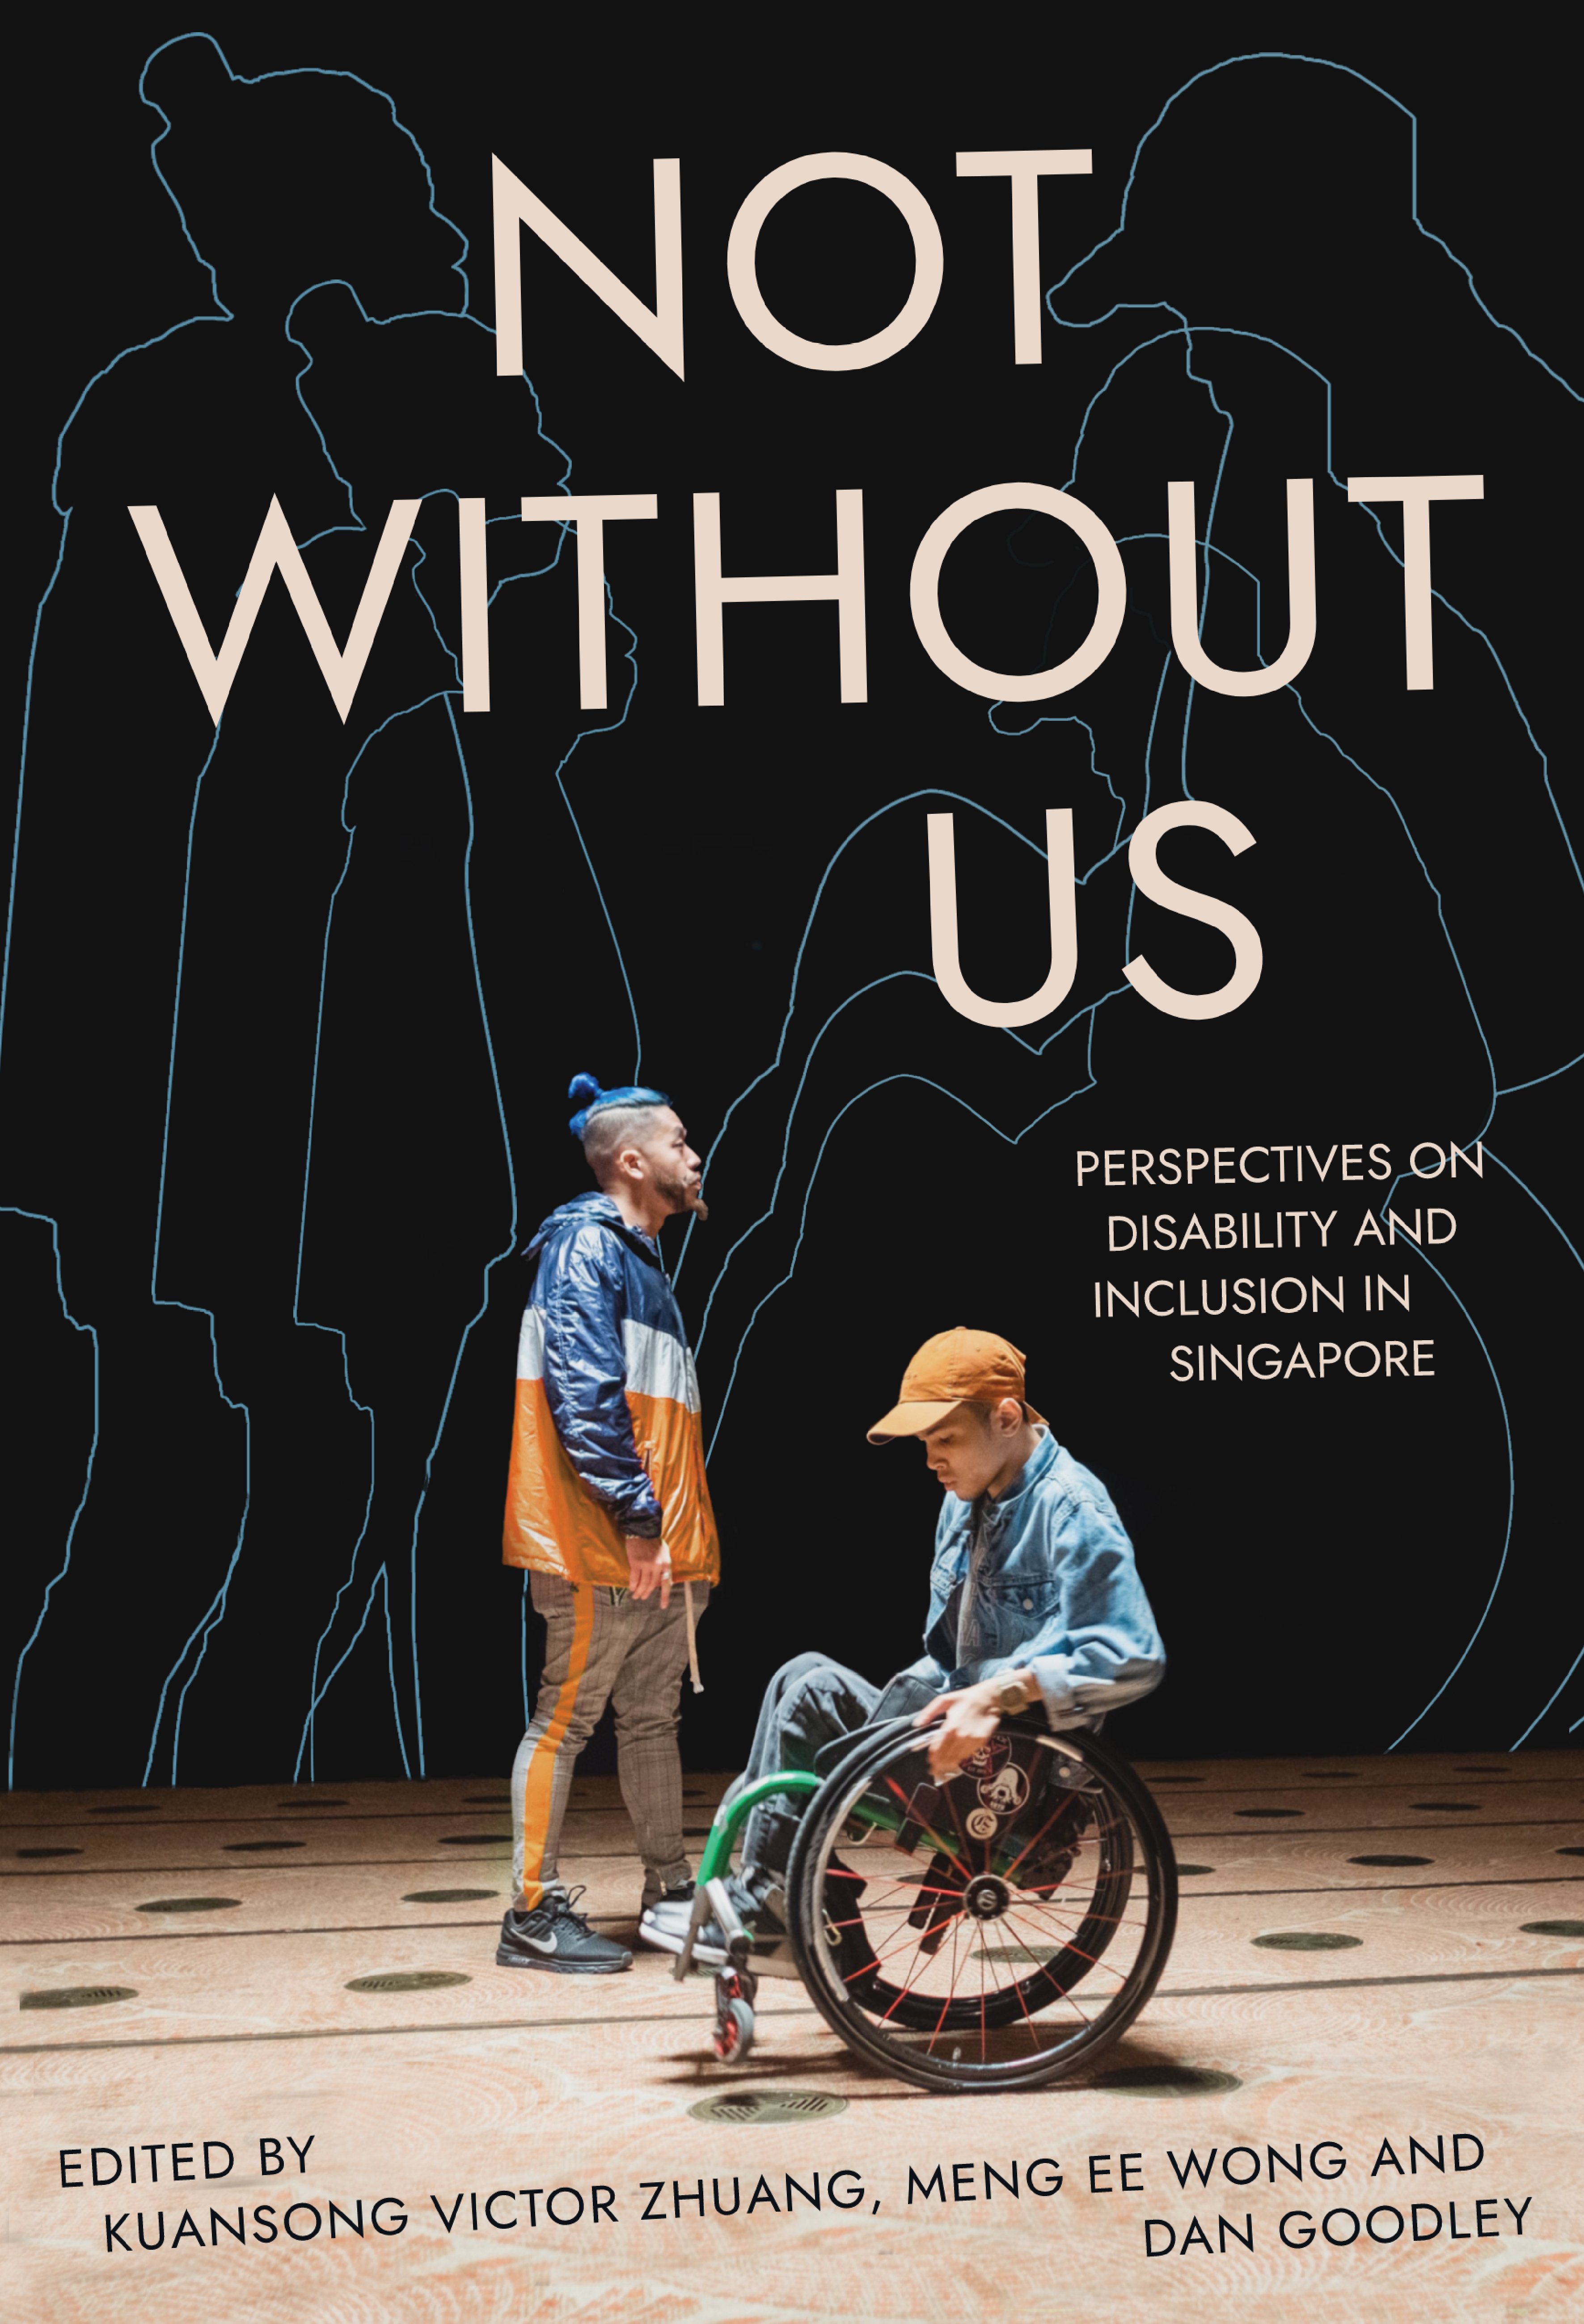 Not Without Us: Perspectives on Disability and Inclusion in Singapore